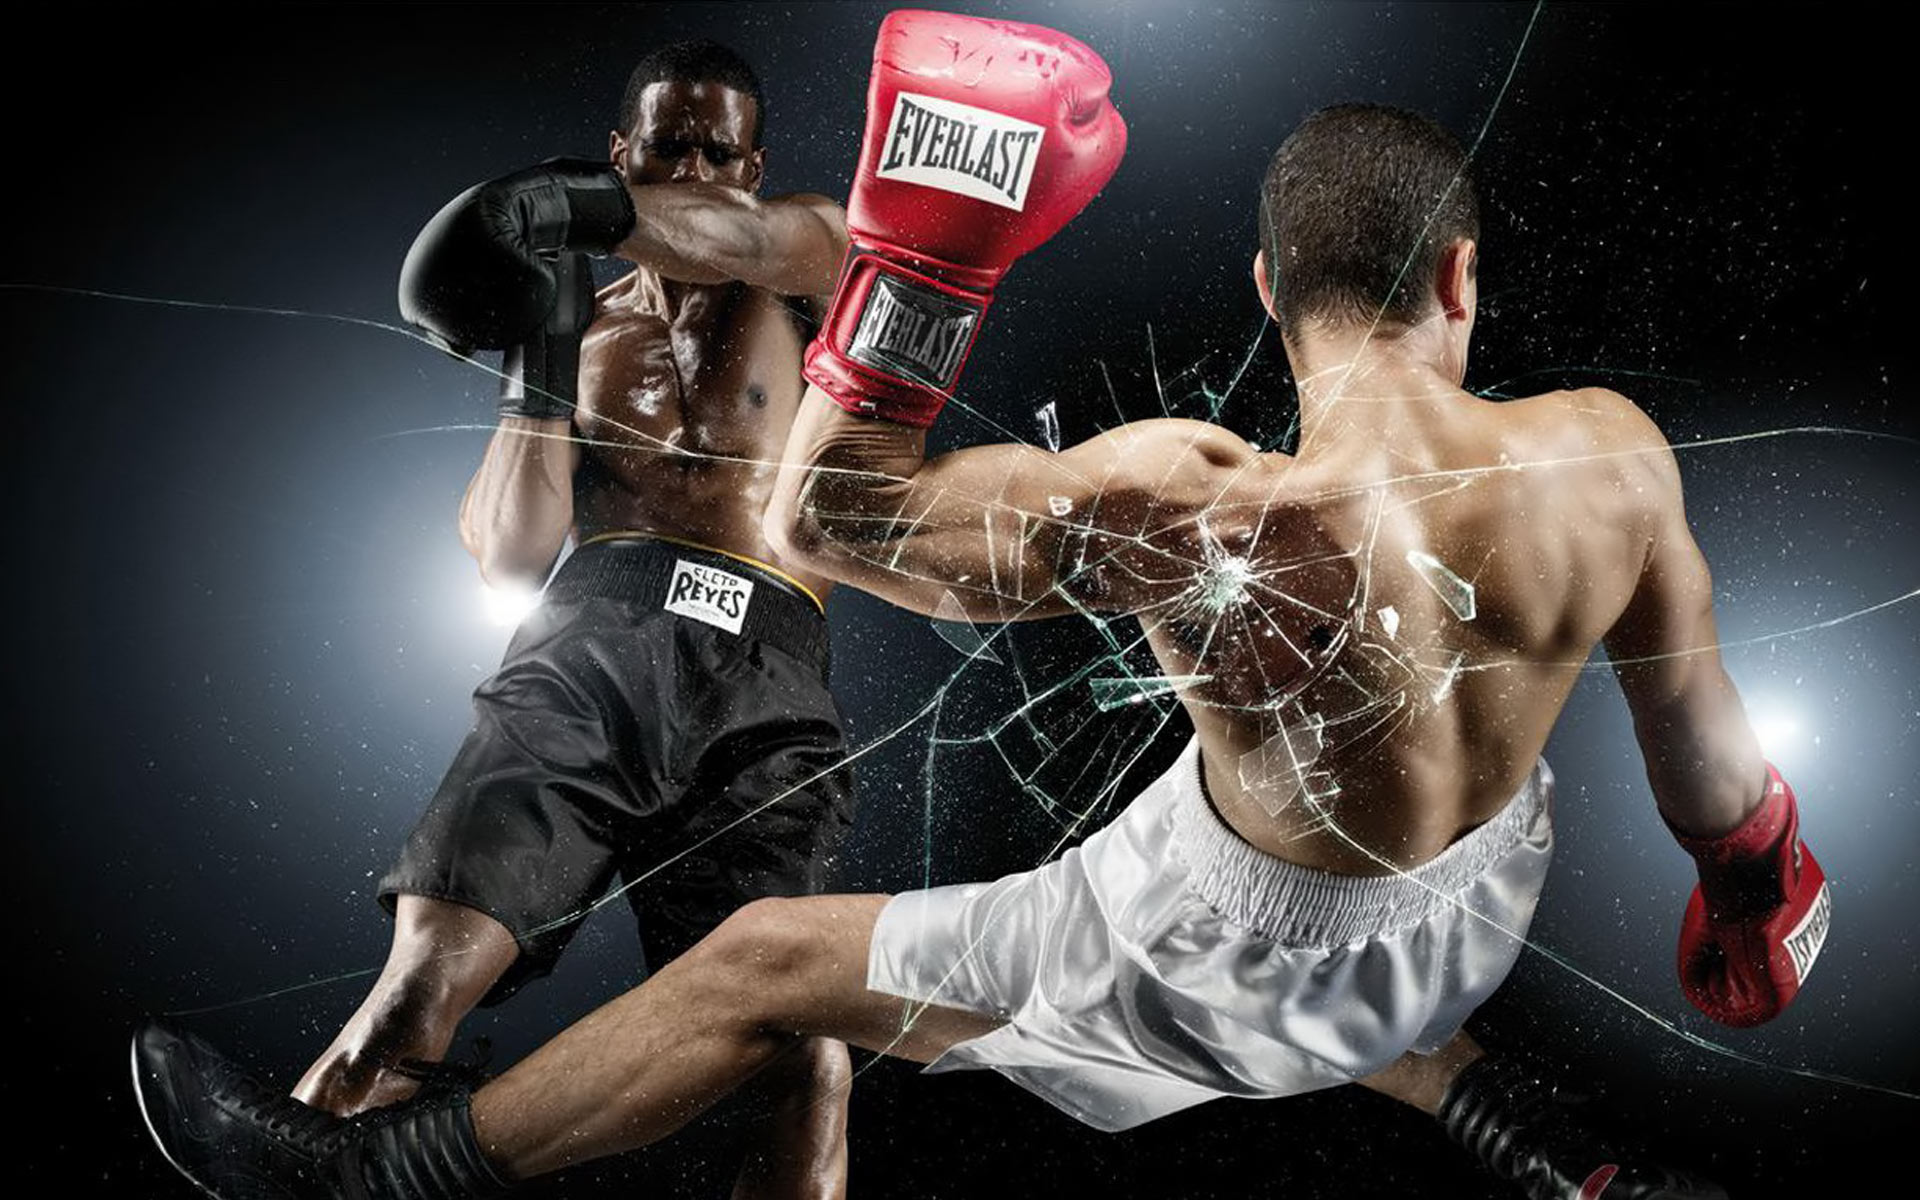 Boxing - An Illegal Sport? - The YLJ